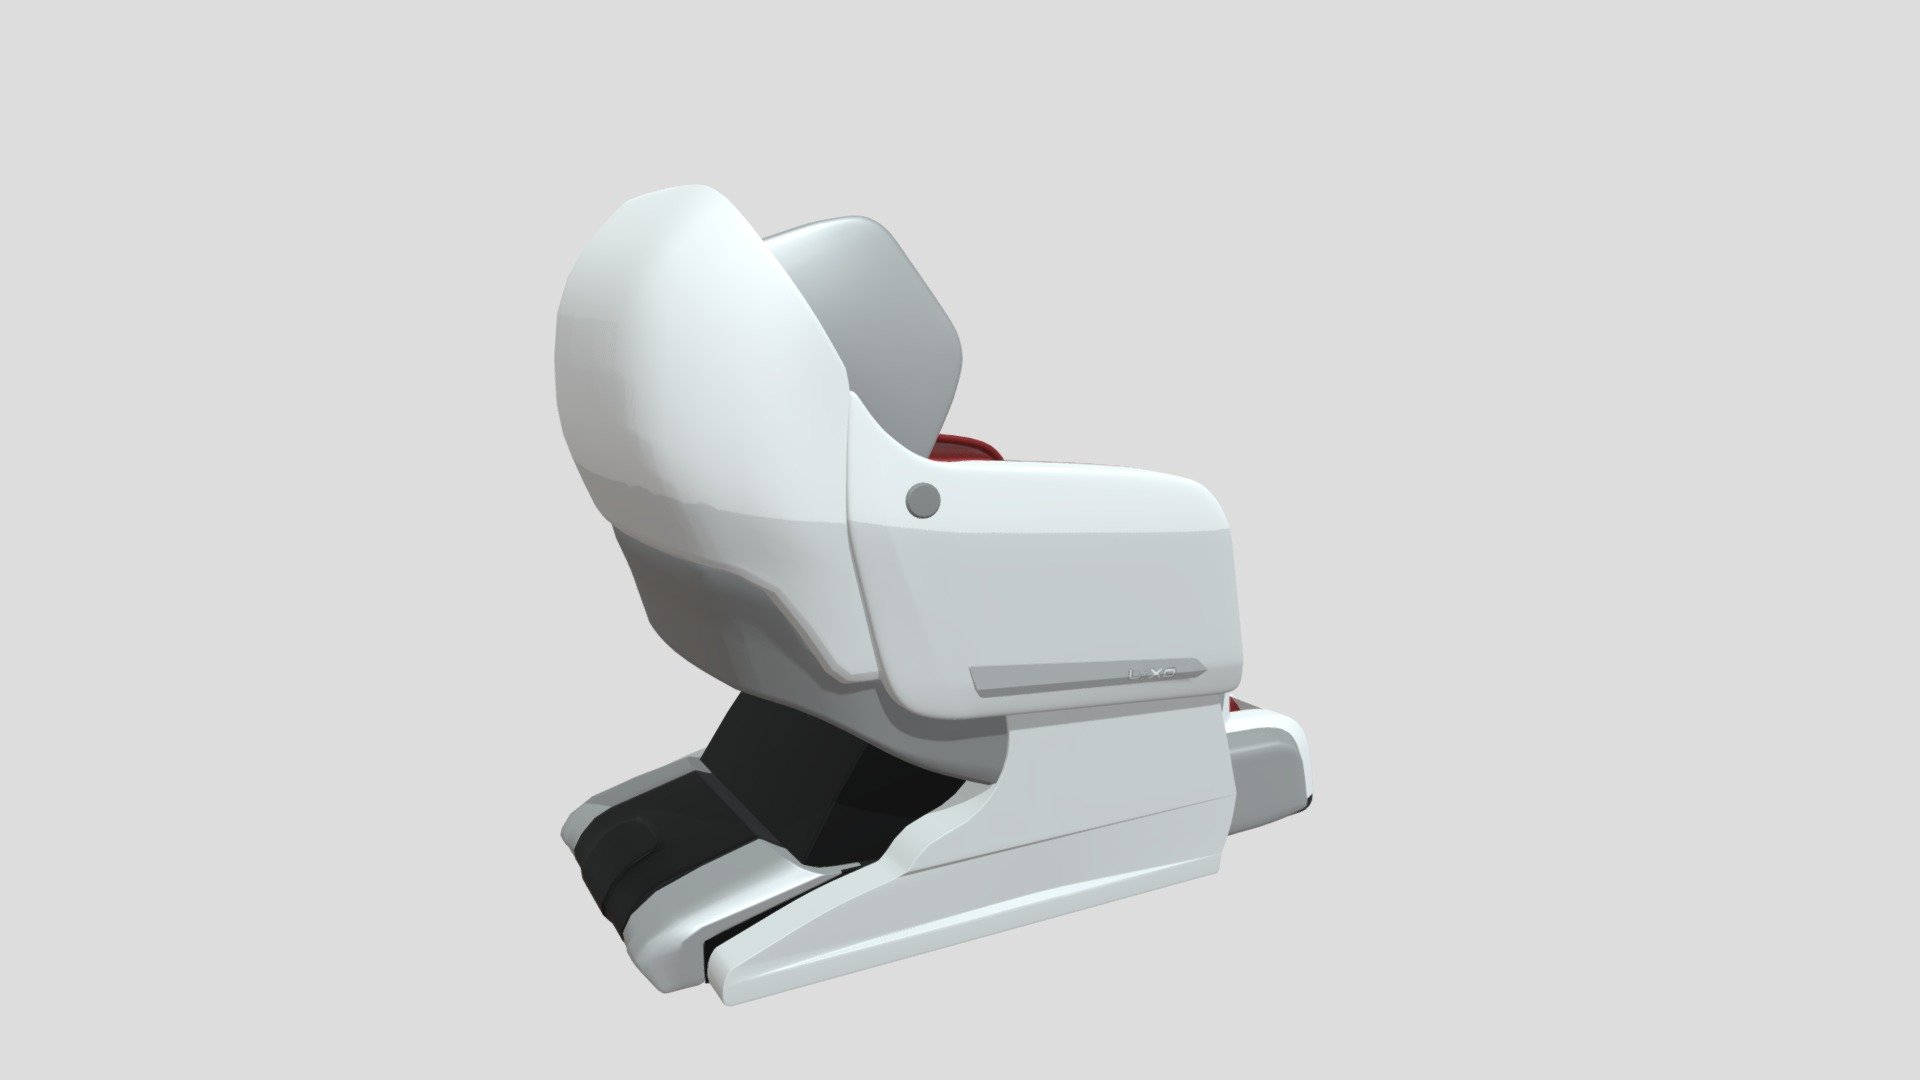 It is Lixo massage chair. It is done using maya, Photoshop and substance painter softwares 3d model